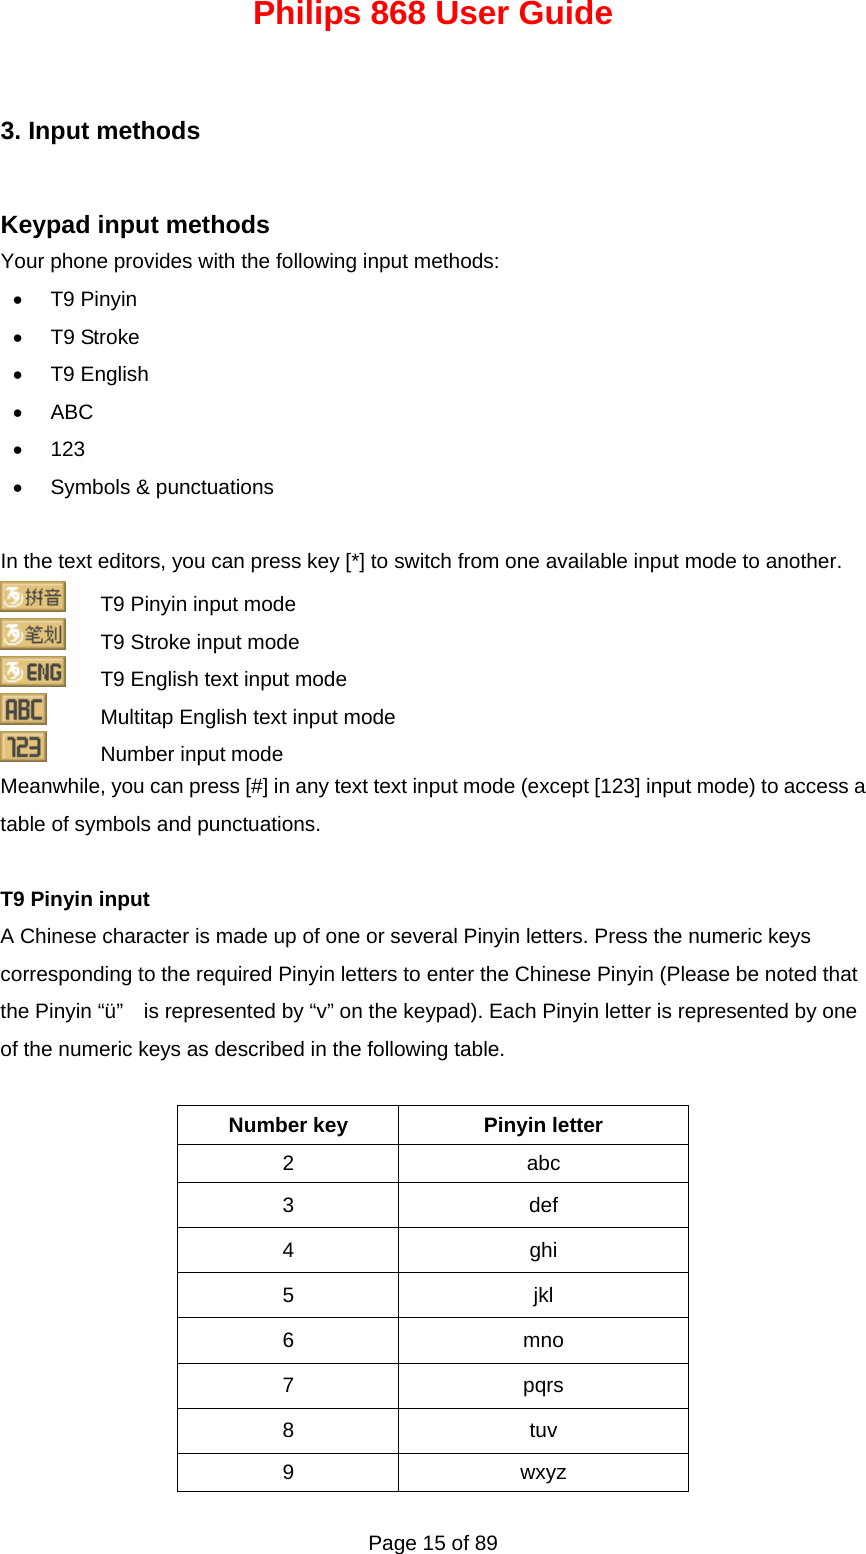 Philips 868 User Guide Page 15 of 89 3. Input methods Keypad input methods Your phone provides with the following input methods: • T9 Pinyin • T9 Stroke • T9 English • ABC • 123 •  Symbols &amp; punctuations  In the text editors, you can press key [*] to switch from one available input mode to another.     T9 Pinyin input mode   T9 Stroke input mode   T9 English text input mode     Multitap English text input mode    Number input mode Meanwhile, you can press [#] in any text text input mode (except [123] input mode) to access a table of symbols and punctuations.  T9 Pinyin input A Chinese character is made up of one or several Pinyin letters. Press the numeric keys corresponding to the required Pinyin letters to enter the Chinese Pinyin (Please be noted that the Pinyin “ü”    is represented by “v” on the keypad). Each Pinyin letter is represented by one of the numeric keys as described in the following table.  Number key  Pinyin letter 2 abc 3 def 4 ghi 5 jkl 6 mno 7 pqrs 8 tuv 9 wxyz 